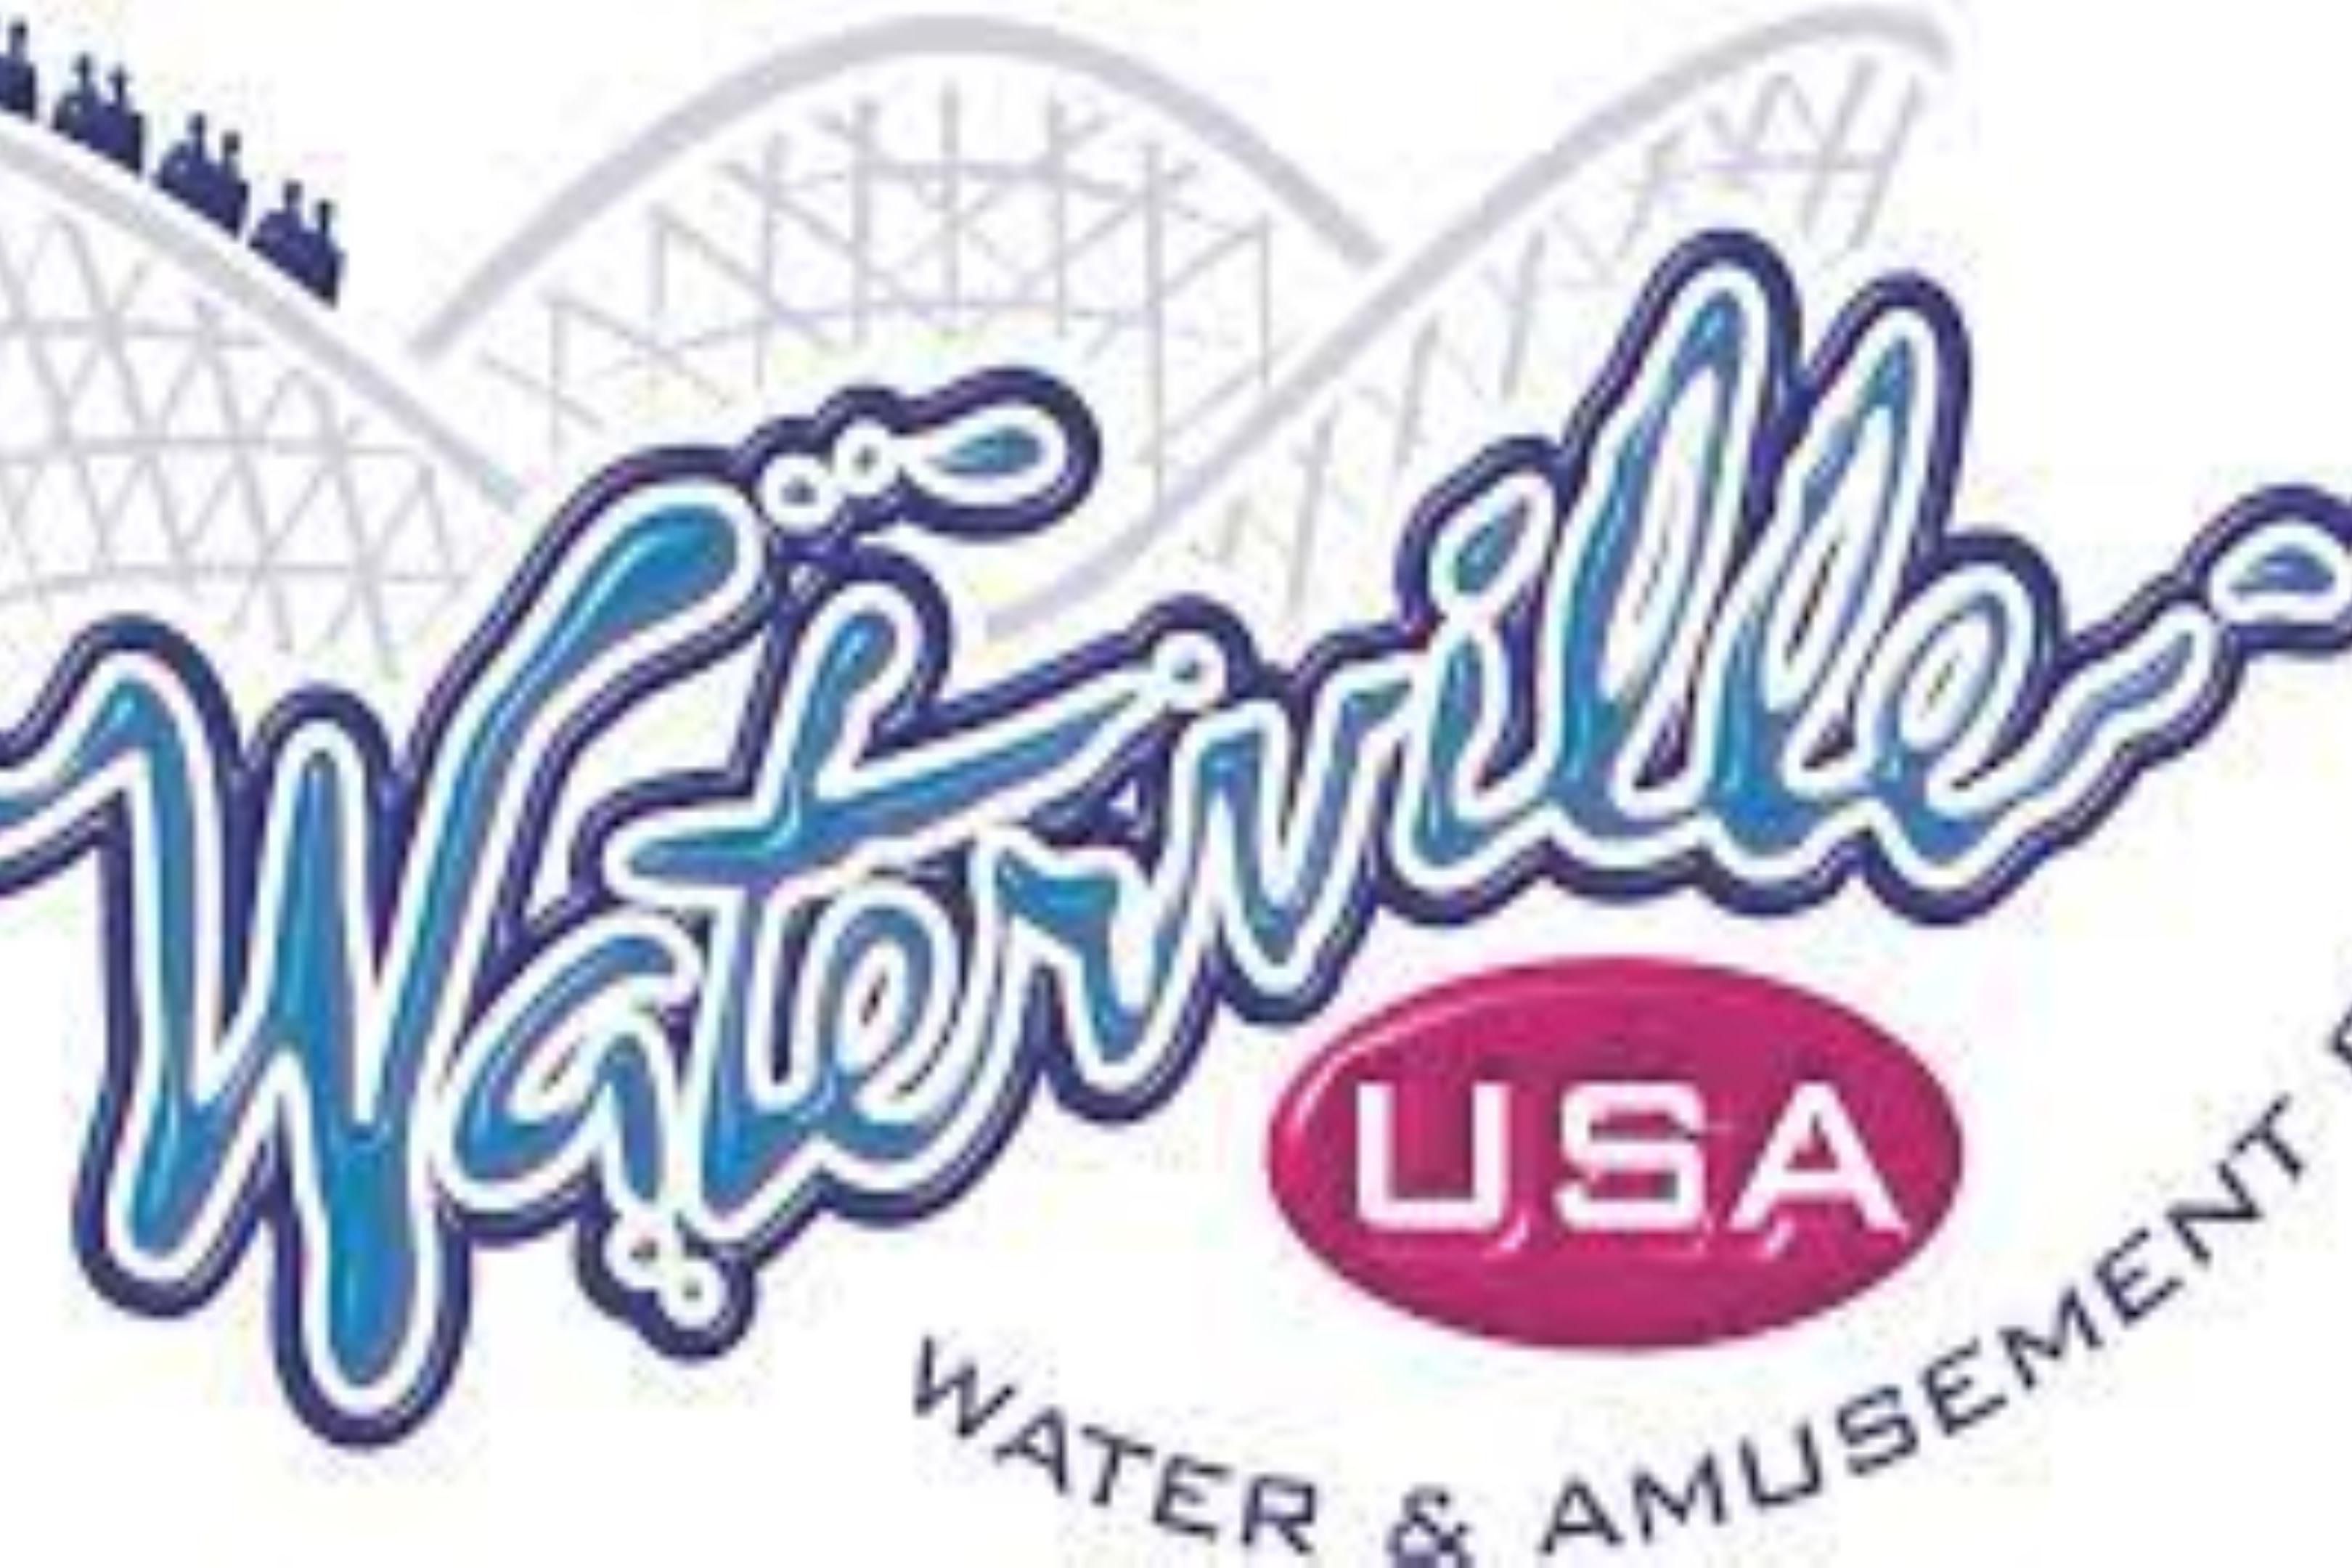 Waterville USA offers you 20-acres of fun through our waterpark, amusement park and escape rooms. Located just 1/4 mile from the beach, we are in the heart of the resort community of Gulf Shores, Alabama. At Waterville USA, we are committed to your experience and that’s what keeps families coming back day after day, year after year, since 1986.